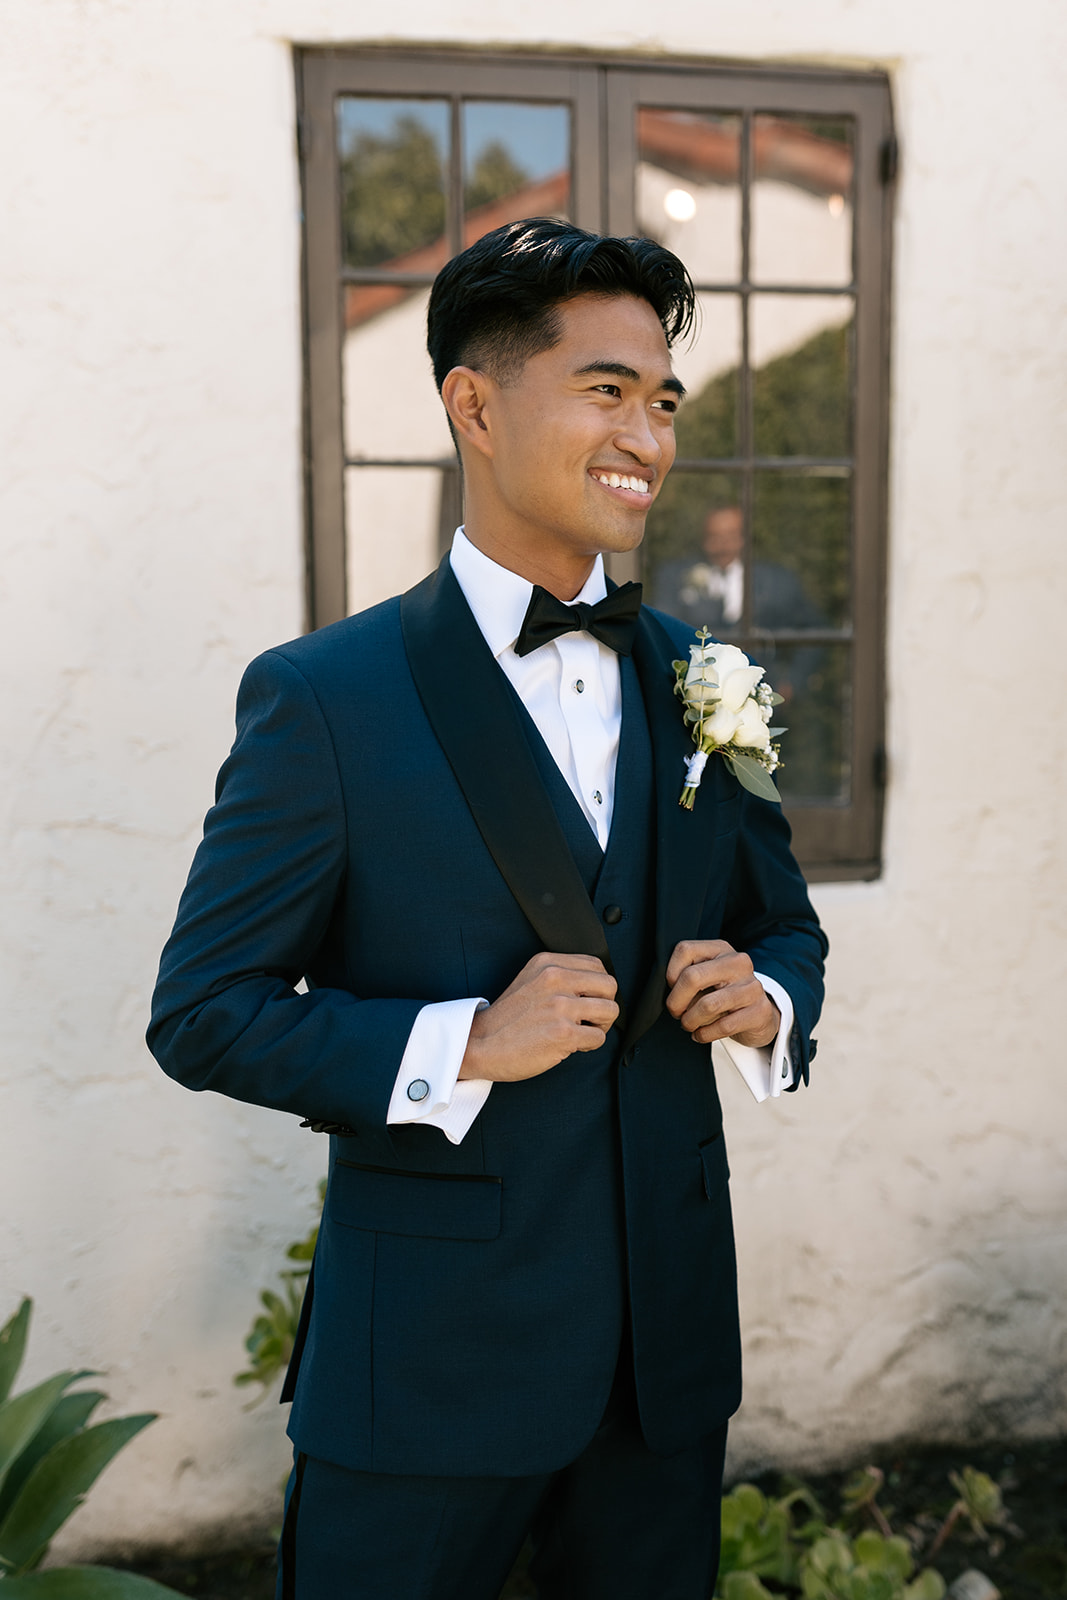 griffith house wedding anaheim california navy blue wedding suit wedding attire wedding dress wedding tux suit and tie